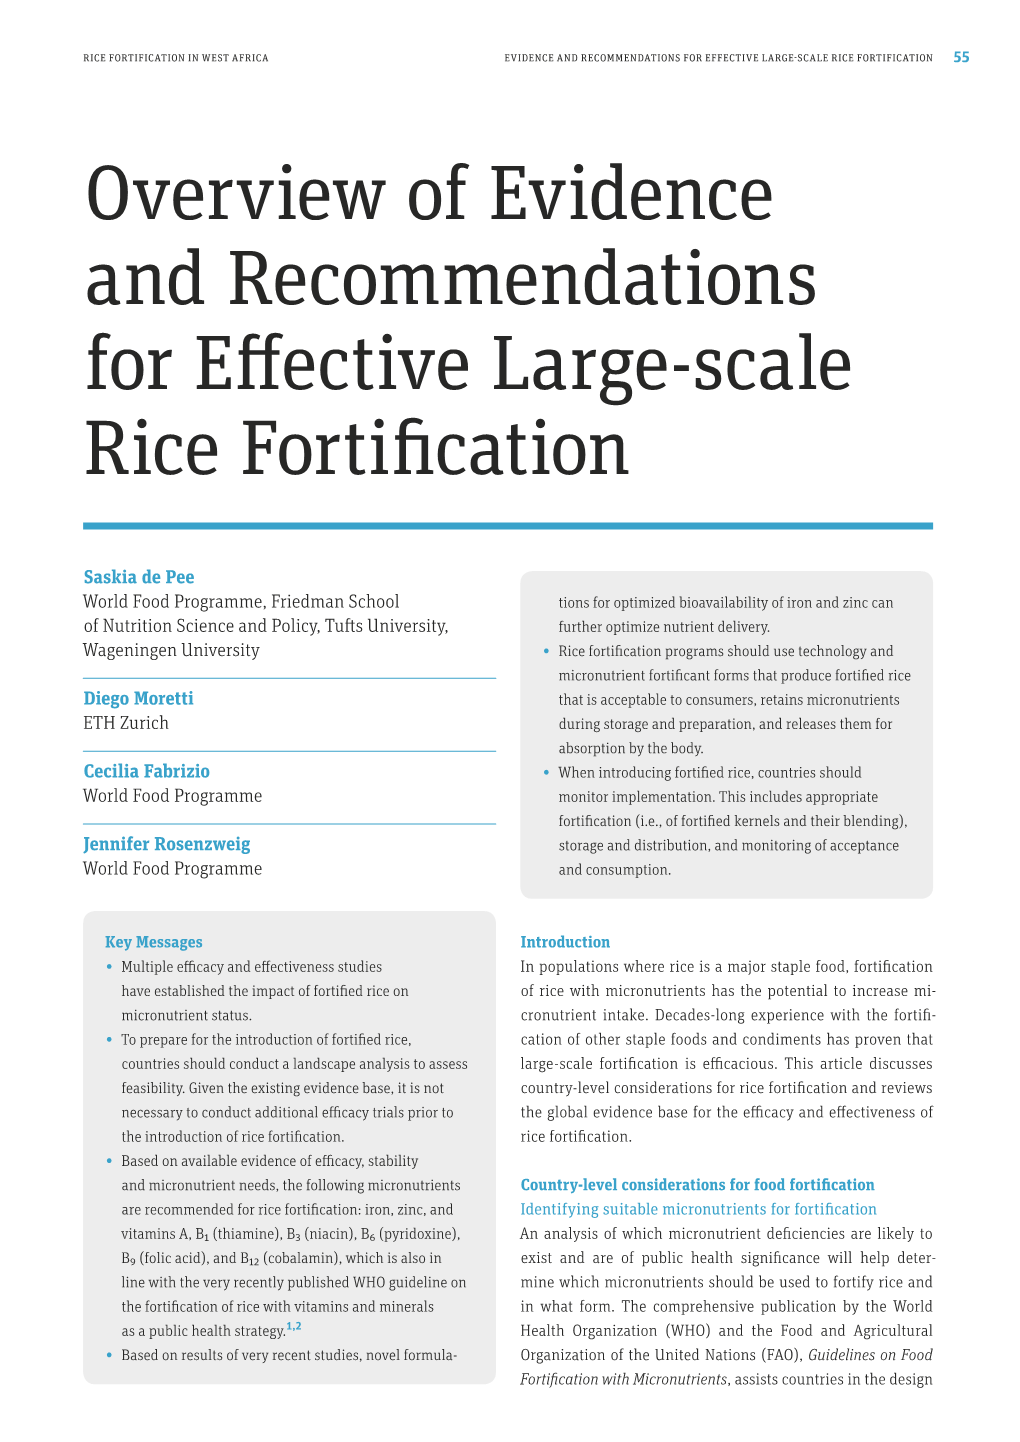 Overview of Evidence and Recommendations for Effective Large-Scale Rice Fortification